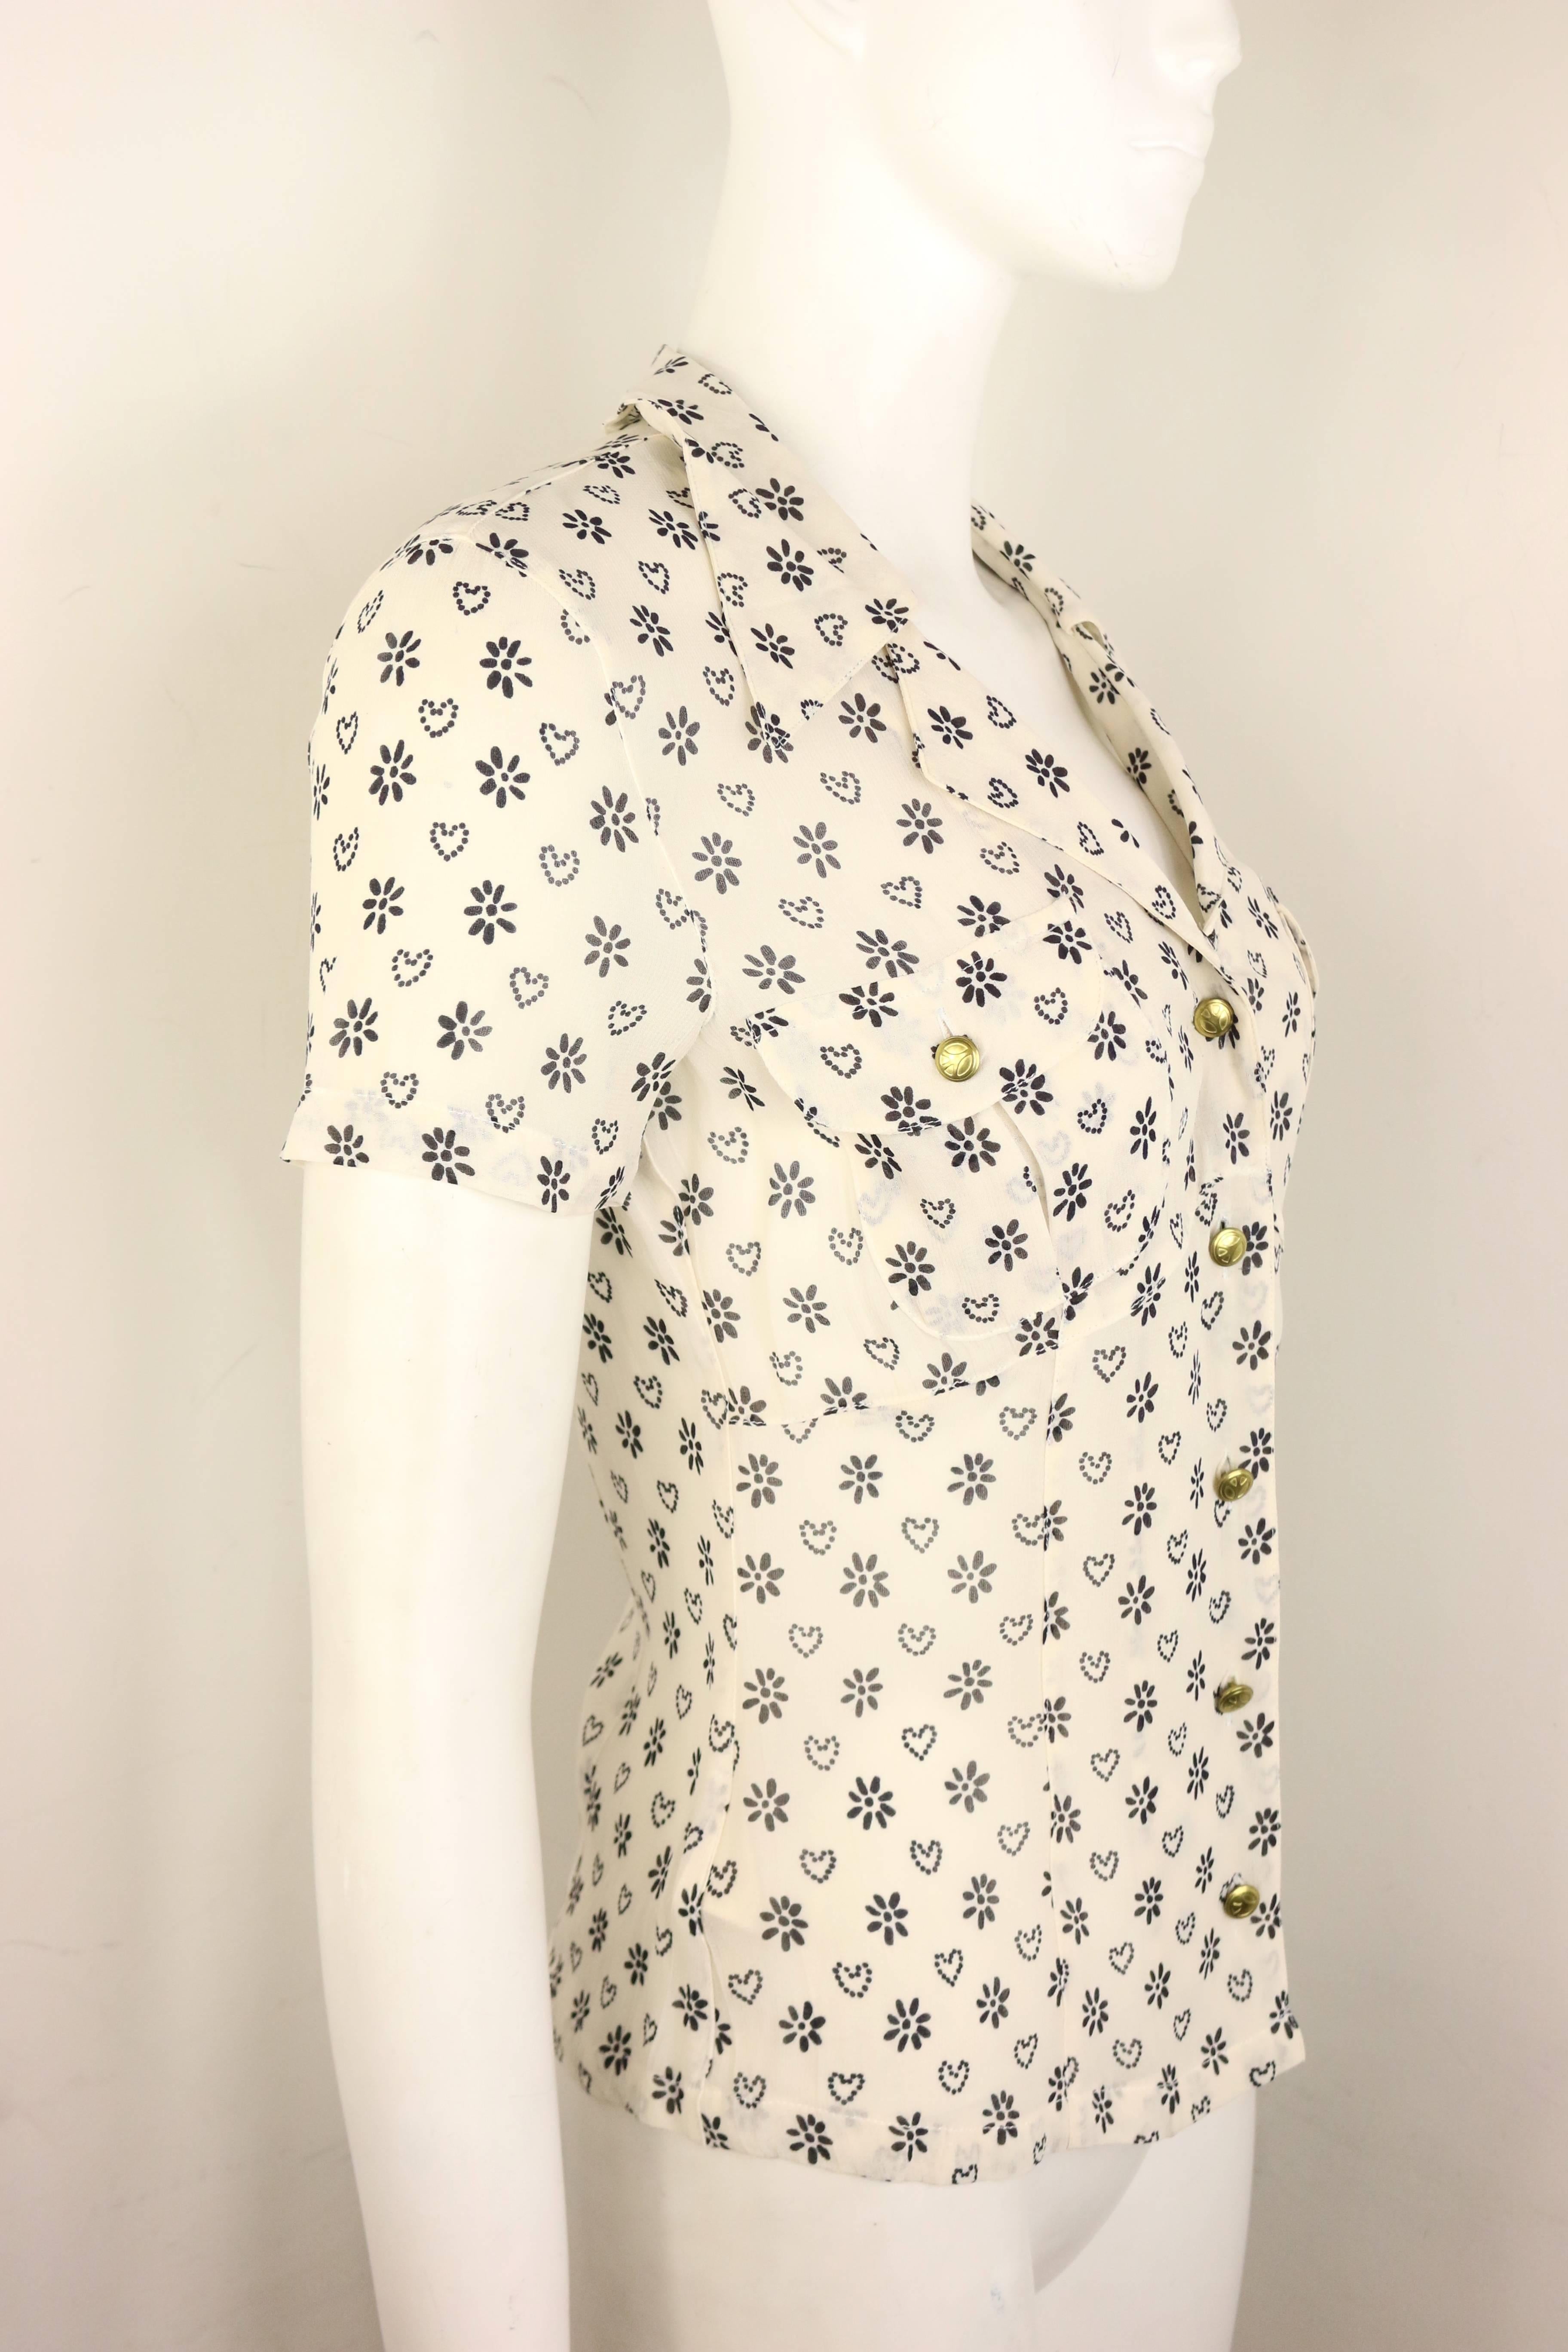 - Vintage 90s Moschino Jeans white short sleeves collar shirt. 

- Featuring black sunflower and heart prints all over, gold-toned 